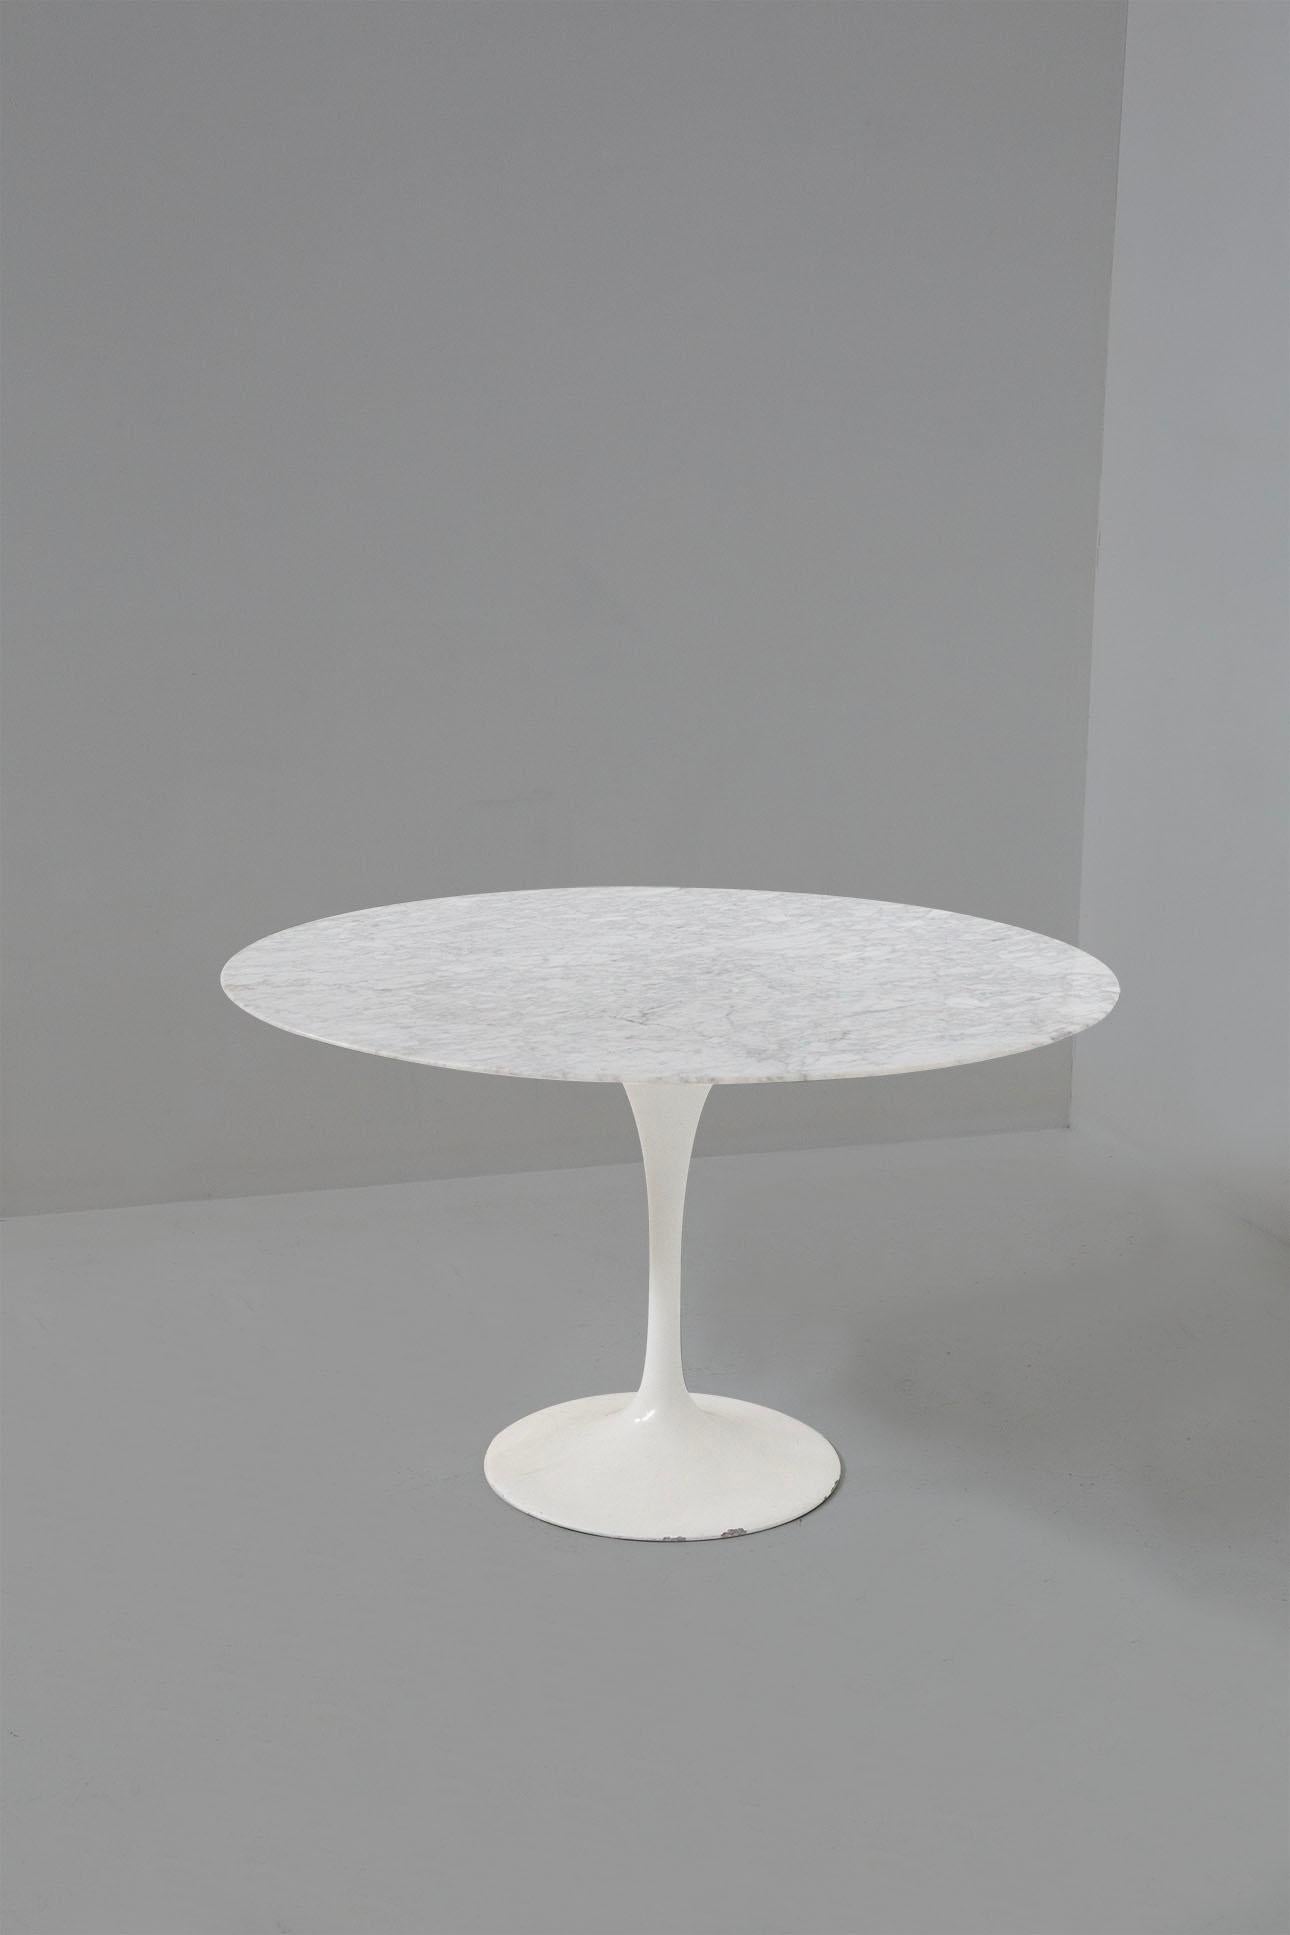 Timeless elegance, timeless design soft and flowing lines. Marble table and aluminum base design by Eero Saarinen from the late 1970s. The table features a round table top made of white marble with black veins of unknown manufacture. The base is a